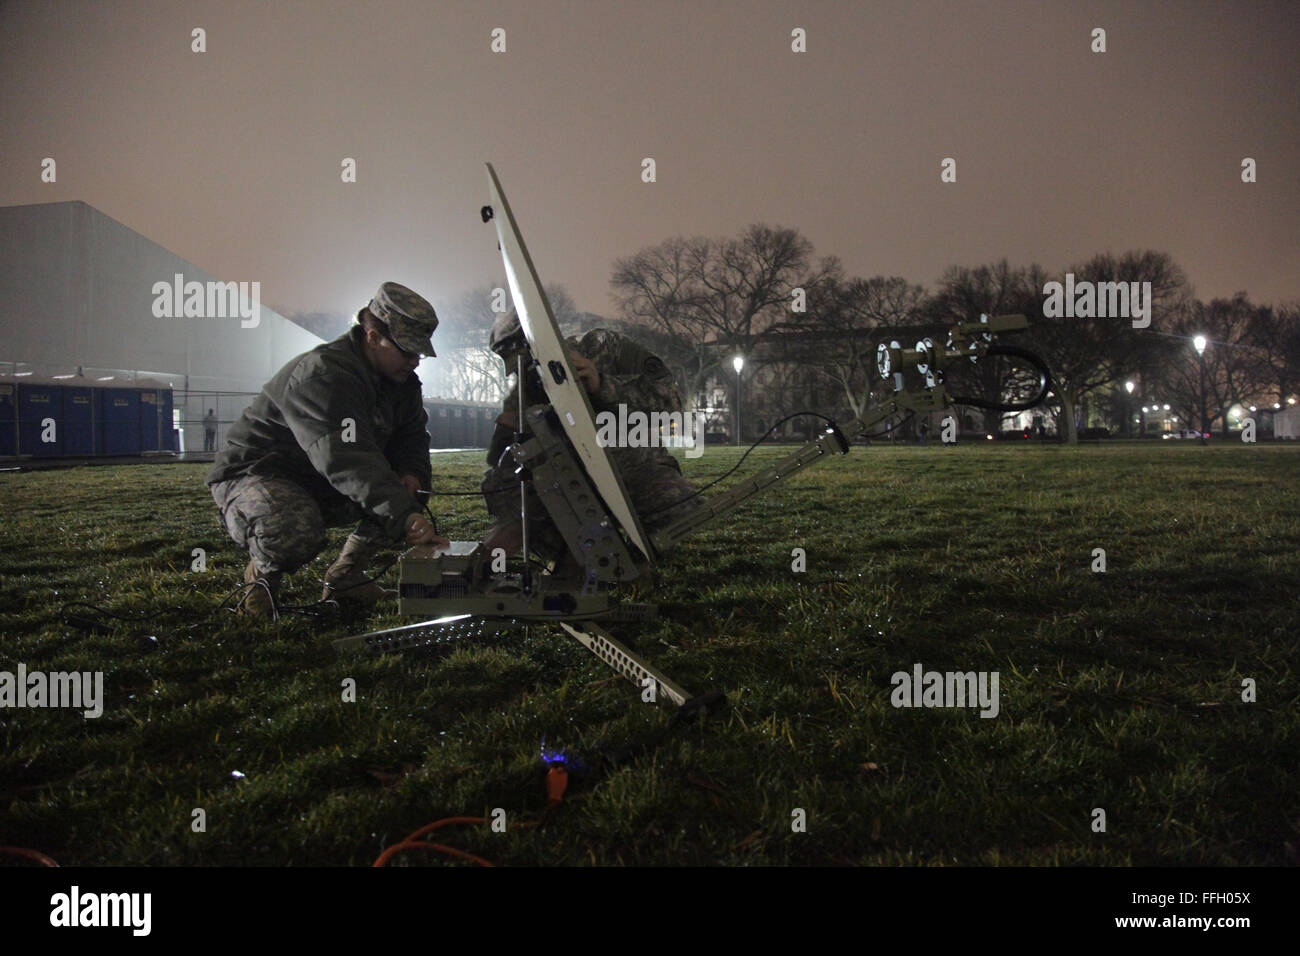 Army National Guard Sgts. Breeanna Pierce (left) and Michael Dann assemble a portable satellite transmitter during a dress rehearsal of the presidential inaugural parade in Washington D.C. The satellite allows news agencies to receive images and video during the 57th Presidential Inauguration. Stock Photo